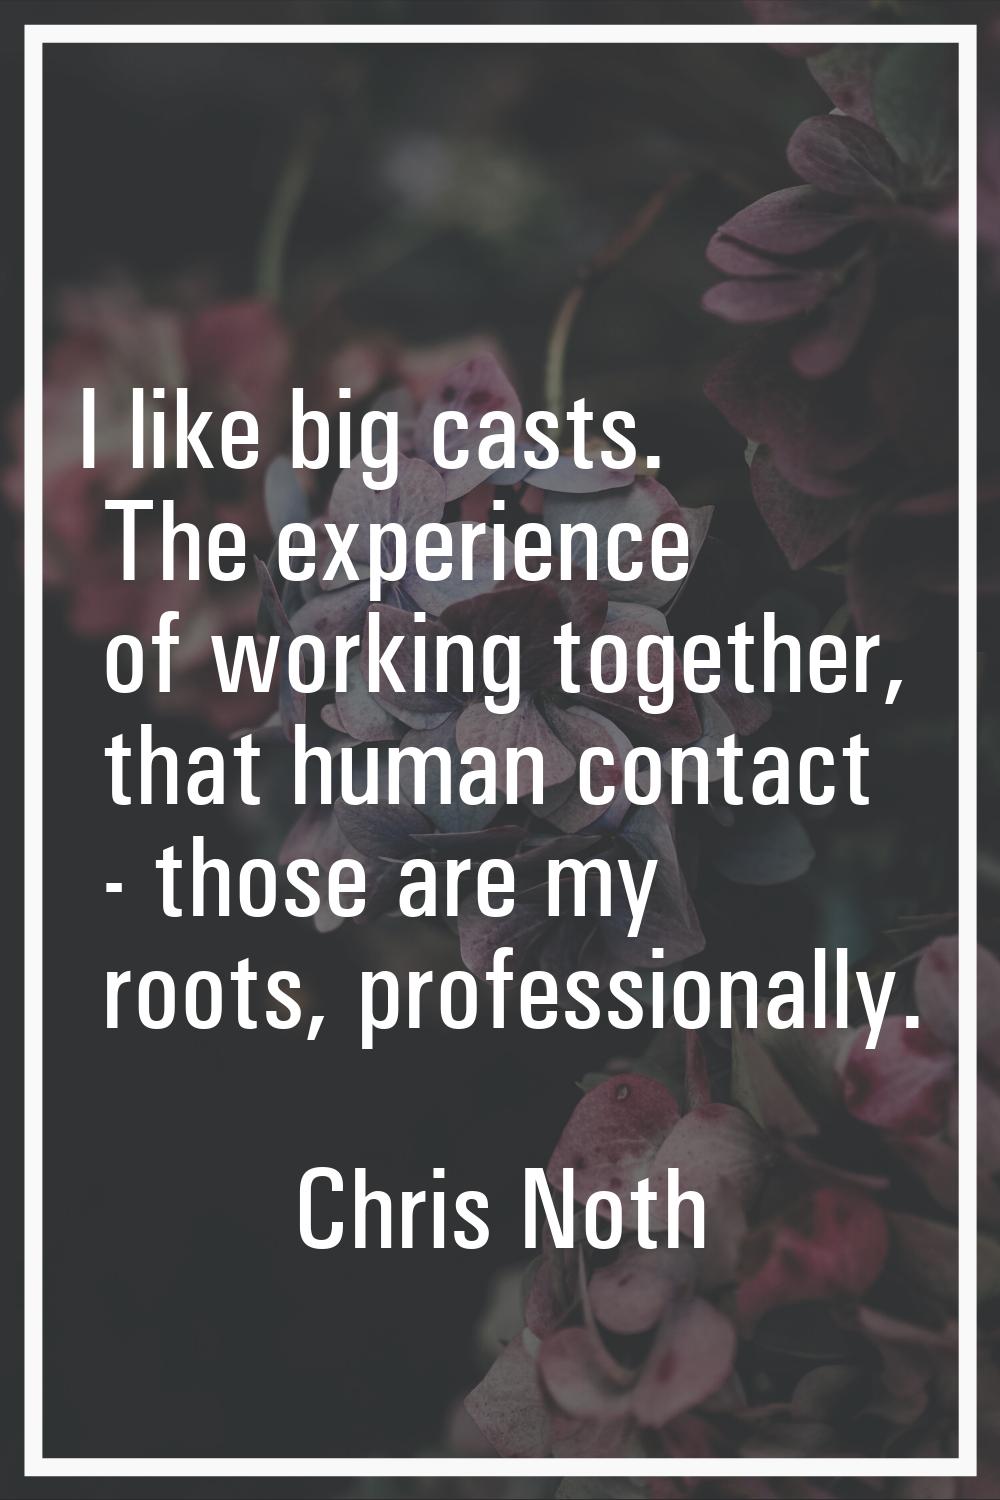 I like big casts. The experience of working together, that human contact - those are my roots, prof